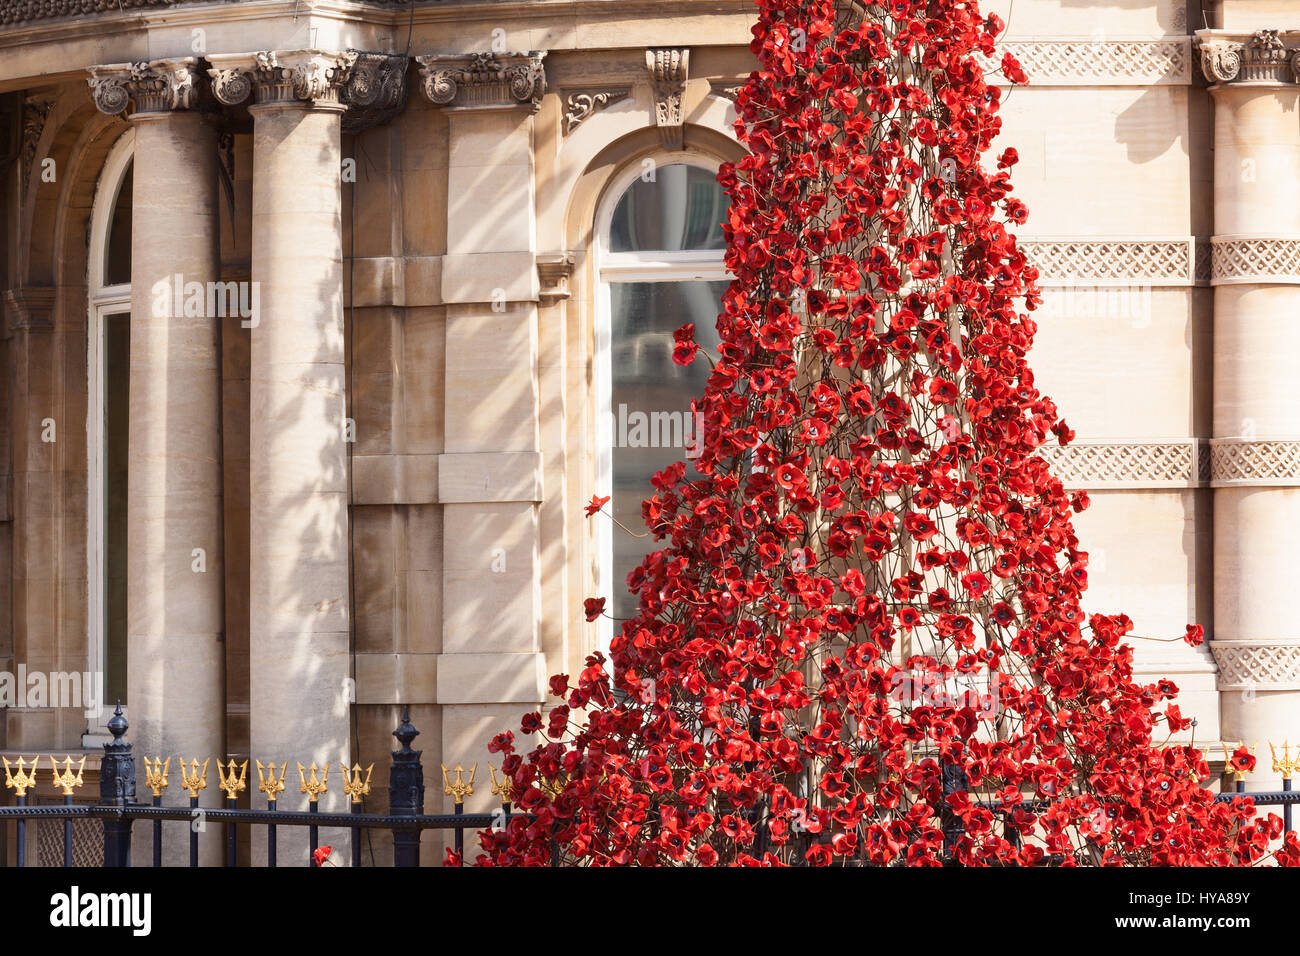 Hull, East Yorkshire, UK. 3rd April 2017. Poppies: Weeping Window by Paul Cummins artist and Tom Piper designer. A cascade of several thousand handmade ceramic poppies installed at Hull’s Maritime Museum. Credit: LEE BEEL/Alamy Live News Stock Photo